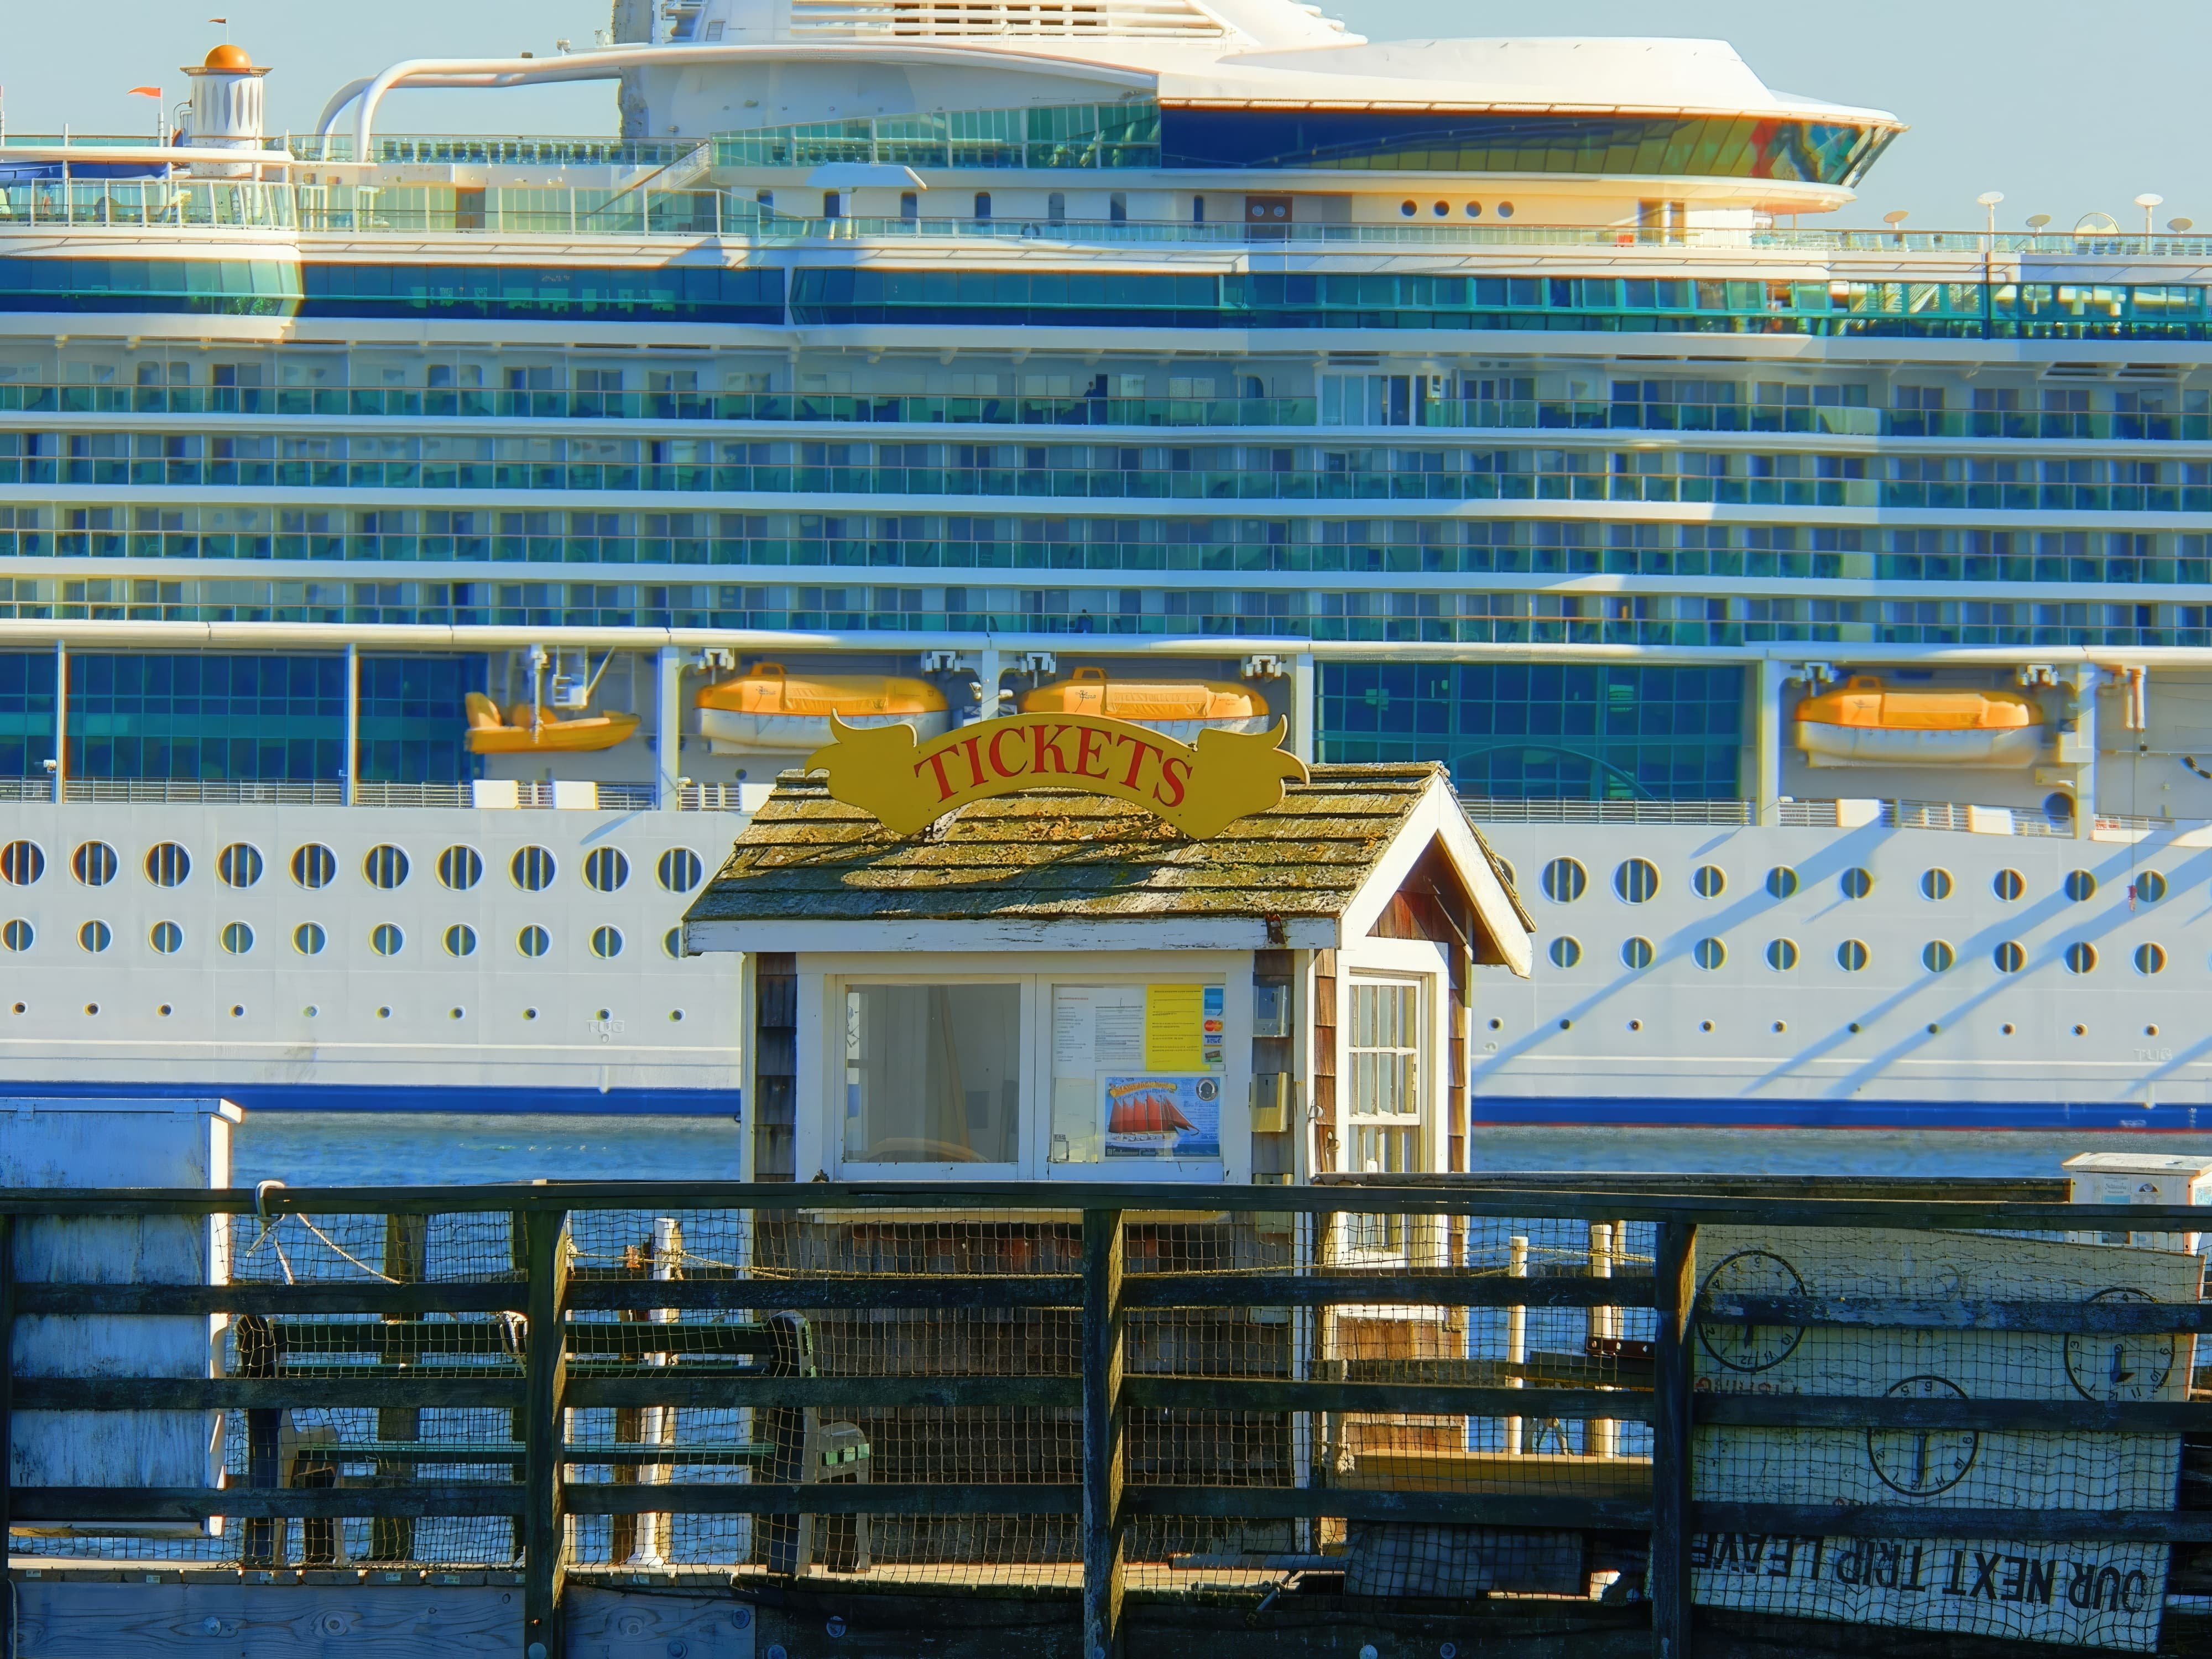 Cruise ship approaching pier with ticket booth